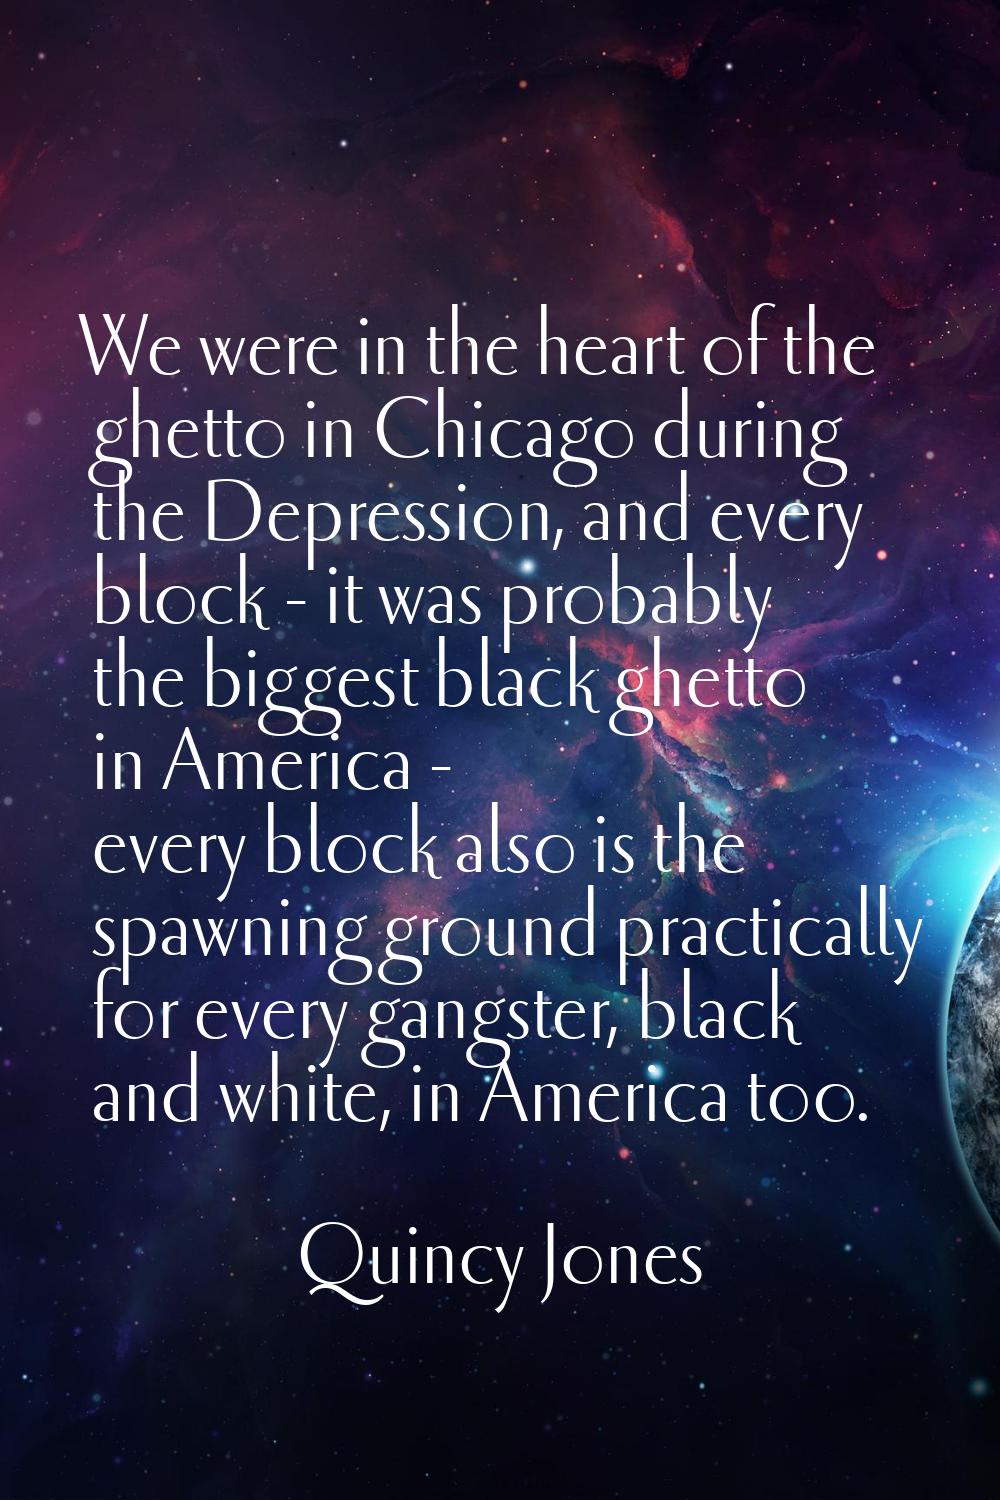 We were in the heart of the ghetto in Chicago during the Depression, and every block - it was proba